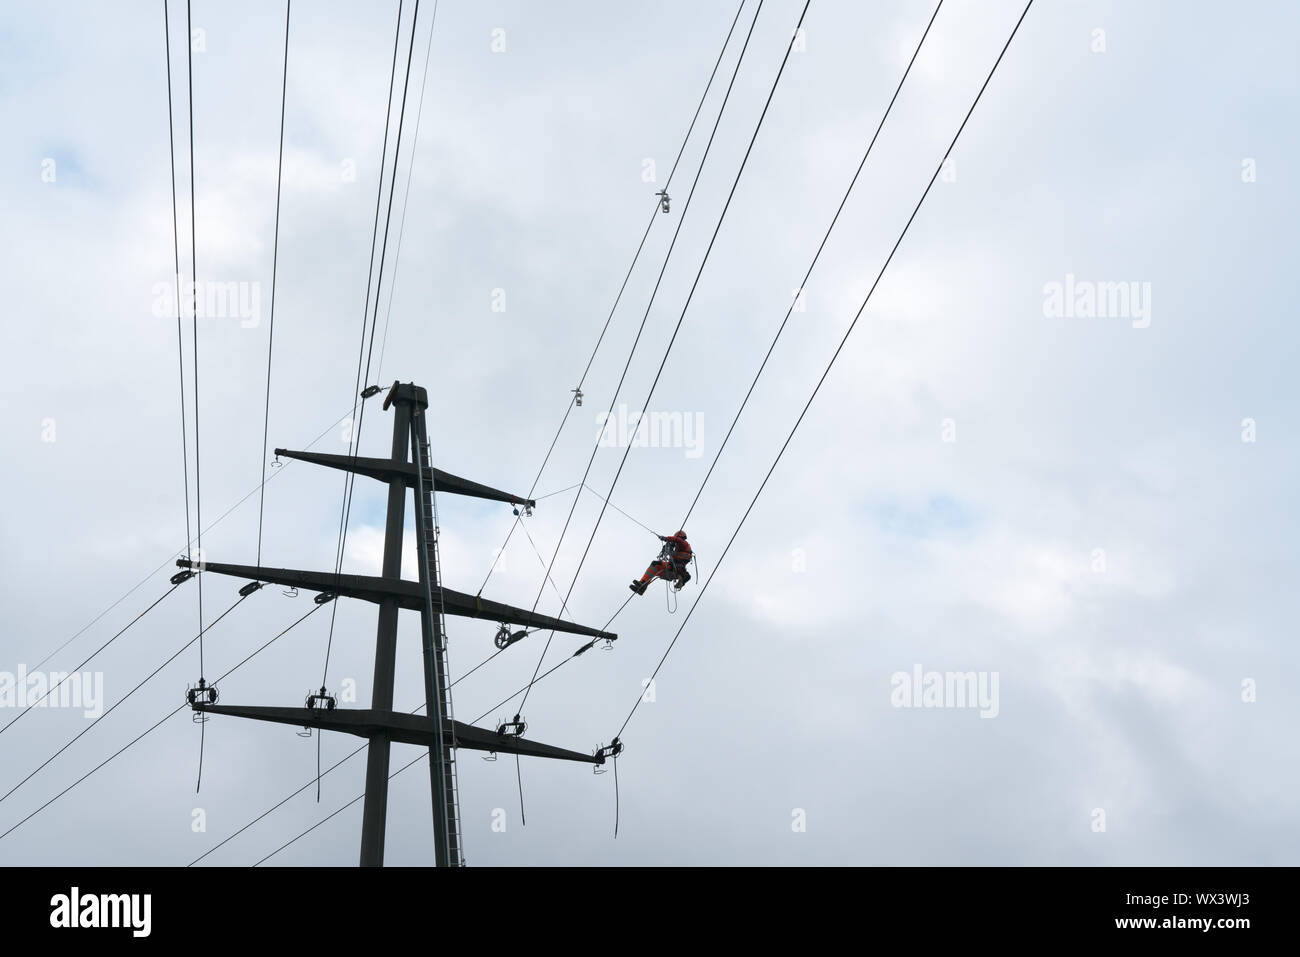 Men with safety equipment working on high voltage power lines Stock Photo